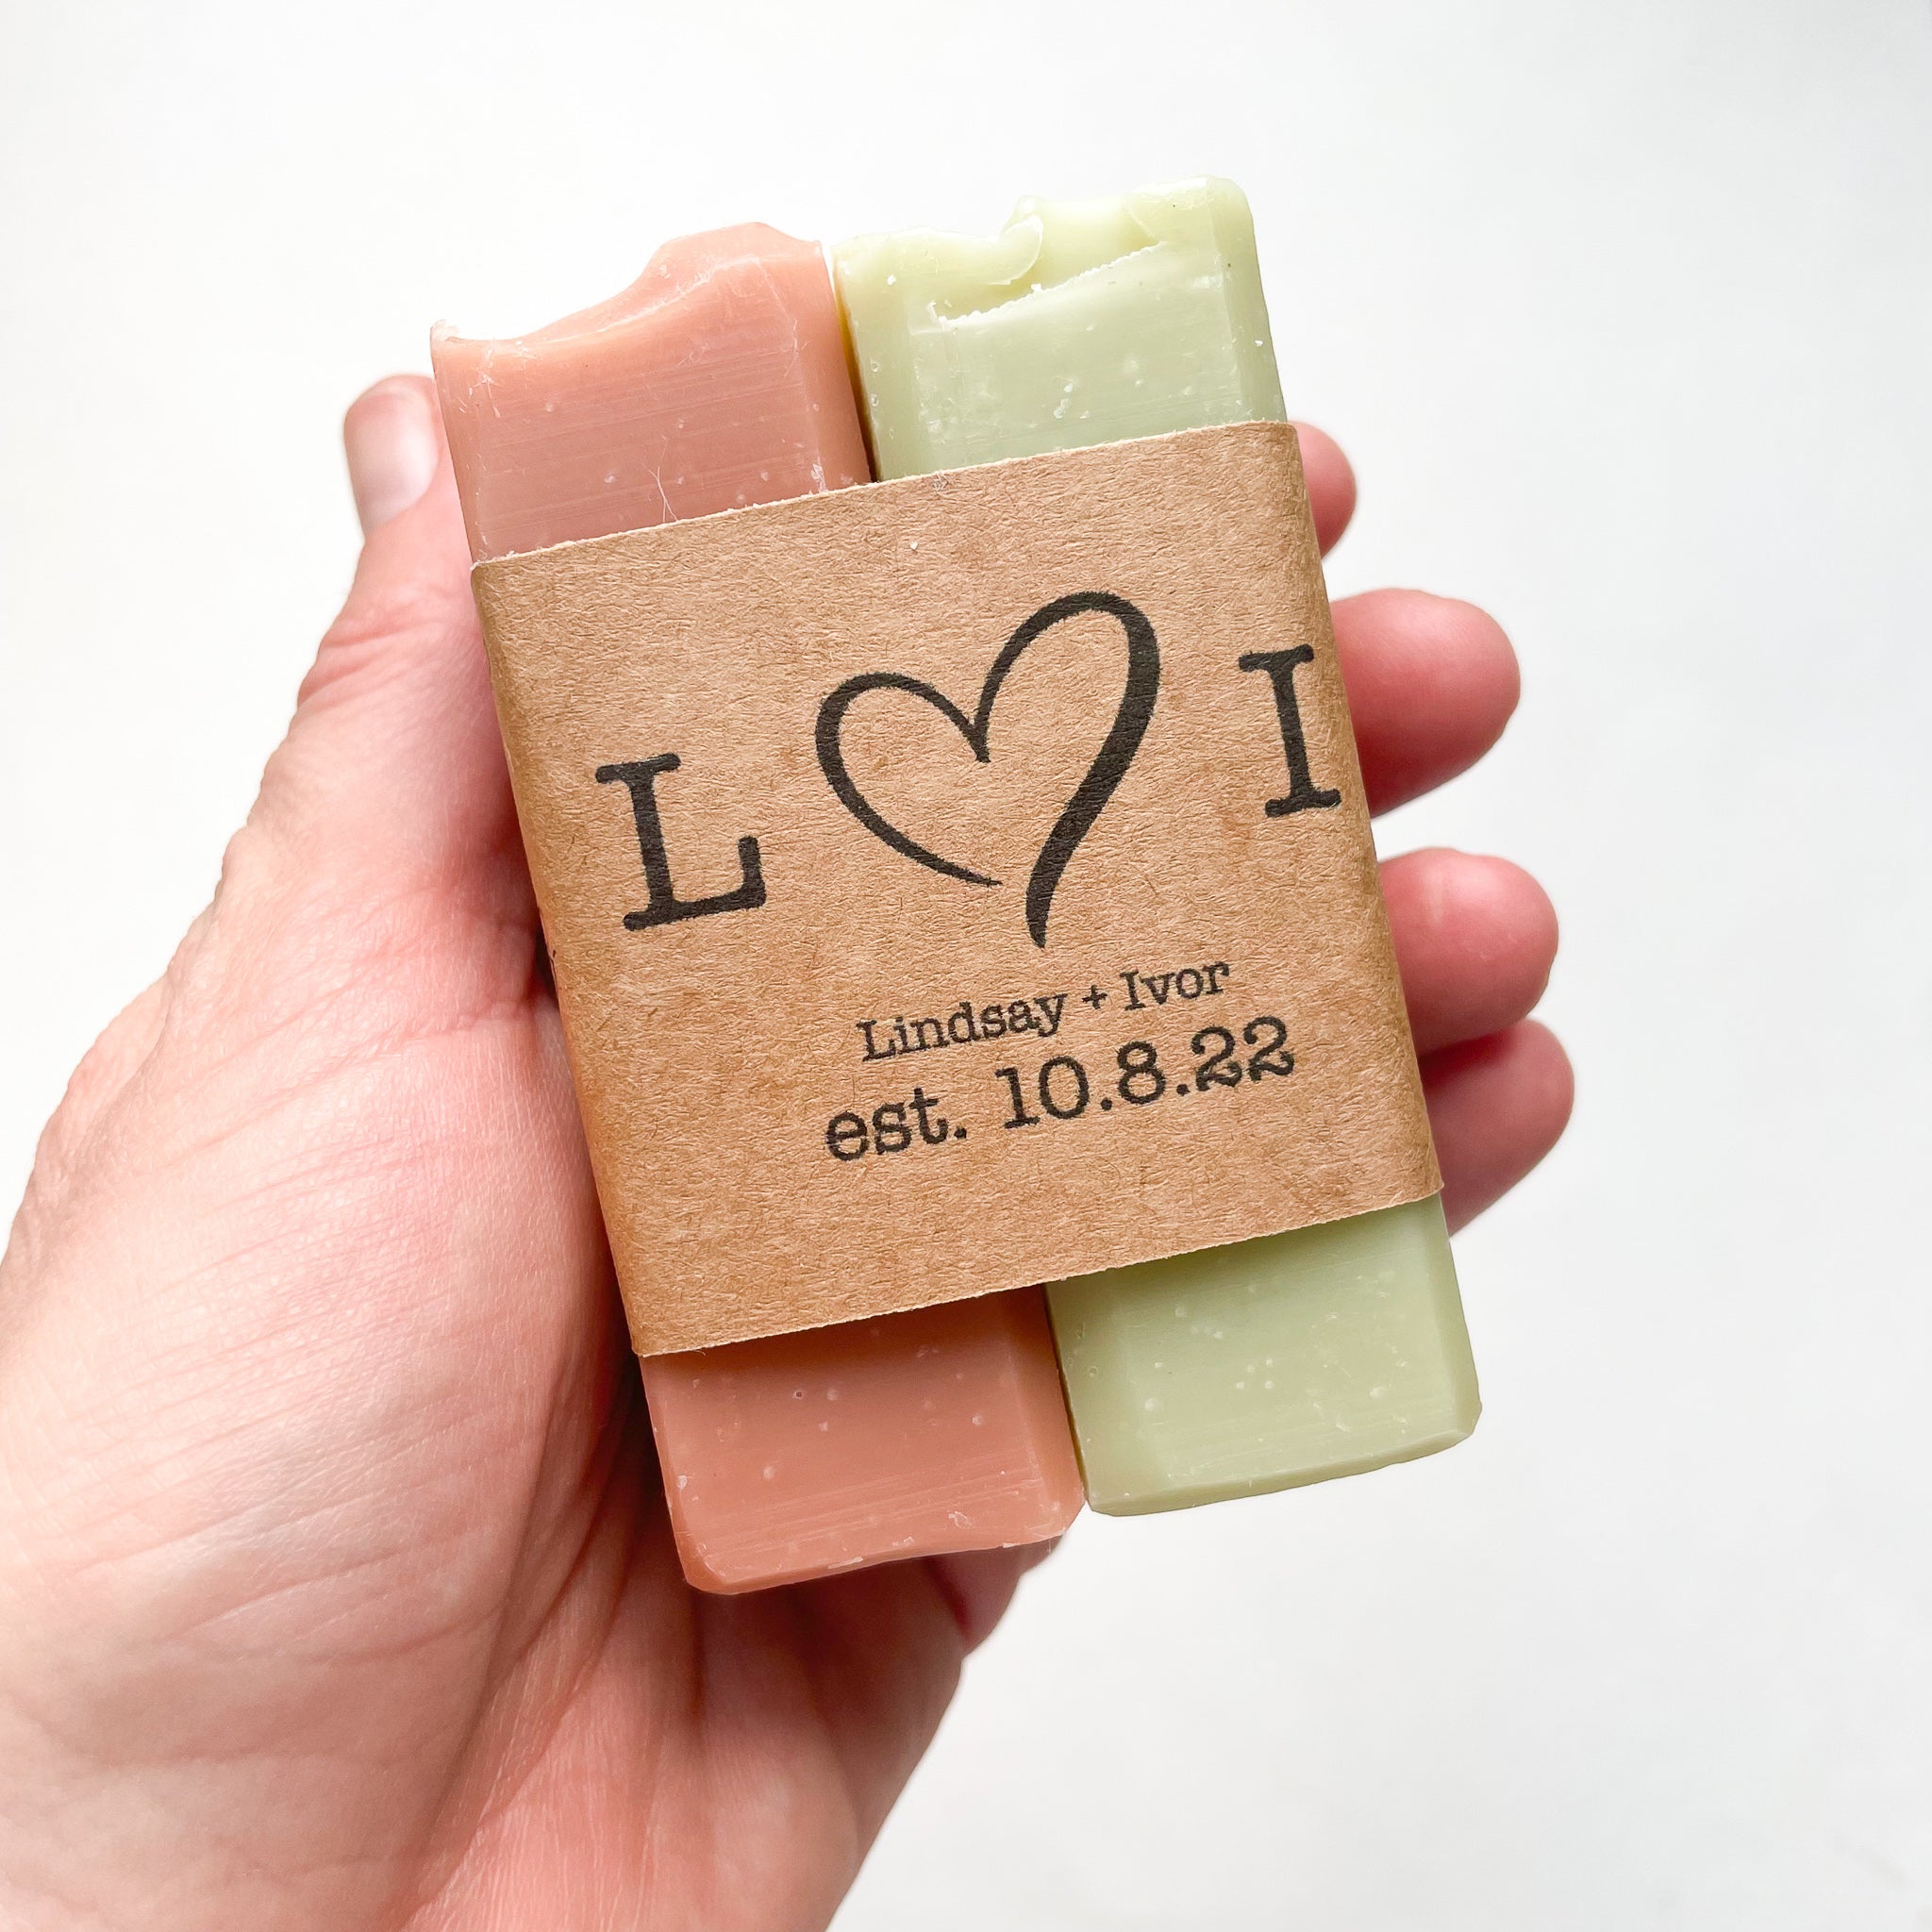 Handmade Soap Wedding Favors | customize your design | great for baby showers/birthday's & more | Minimum Order Quantity of 25 favors